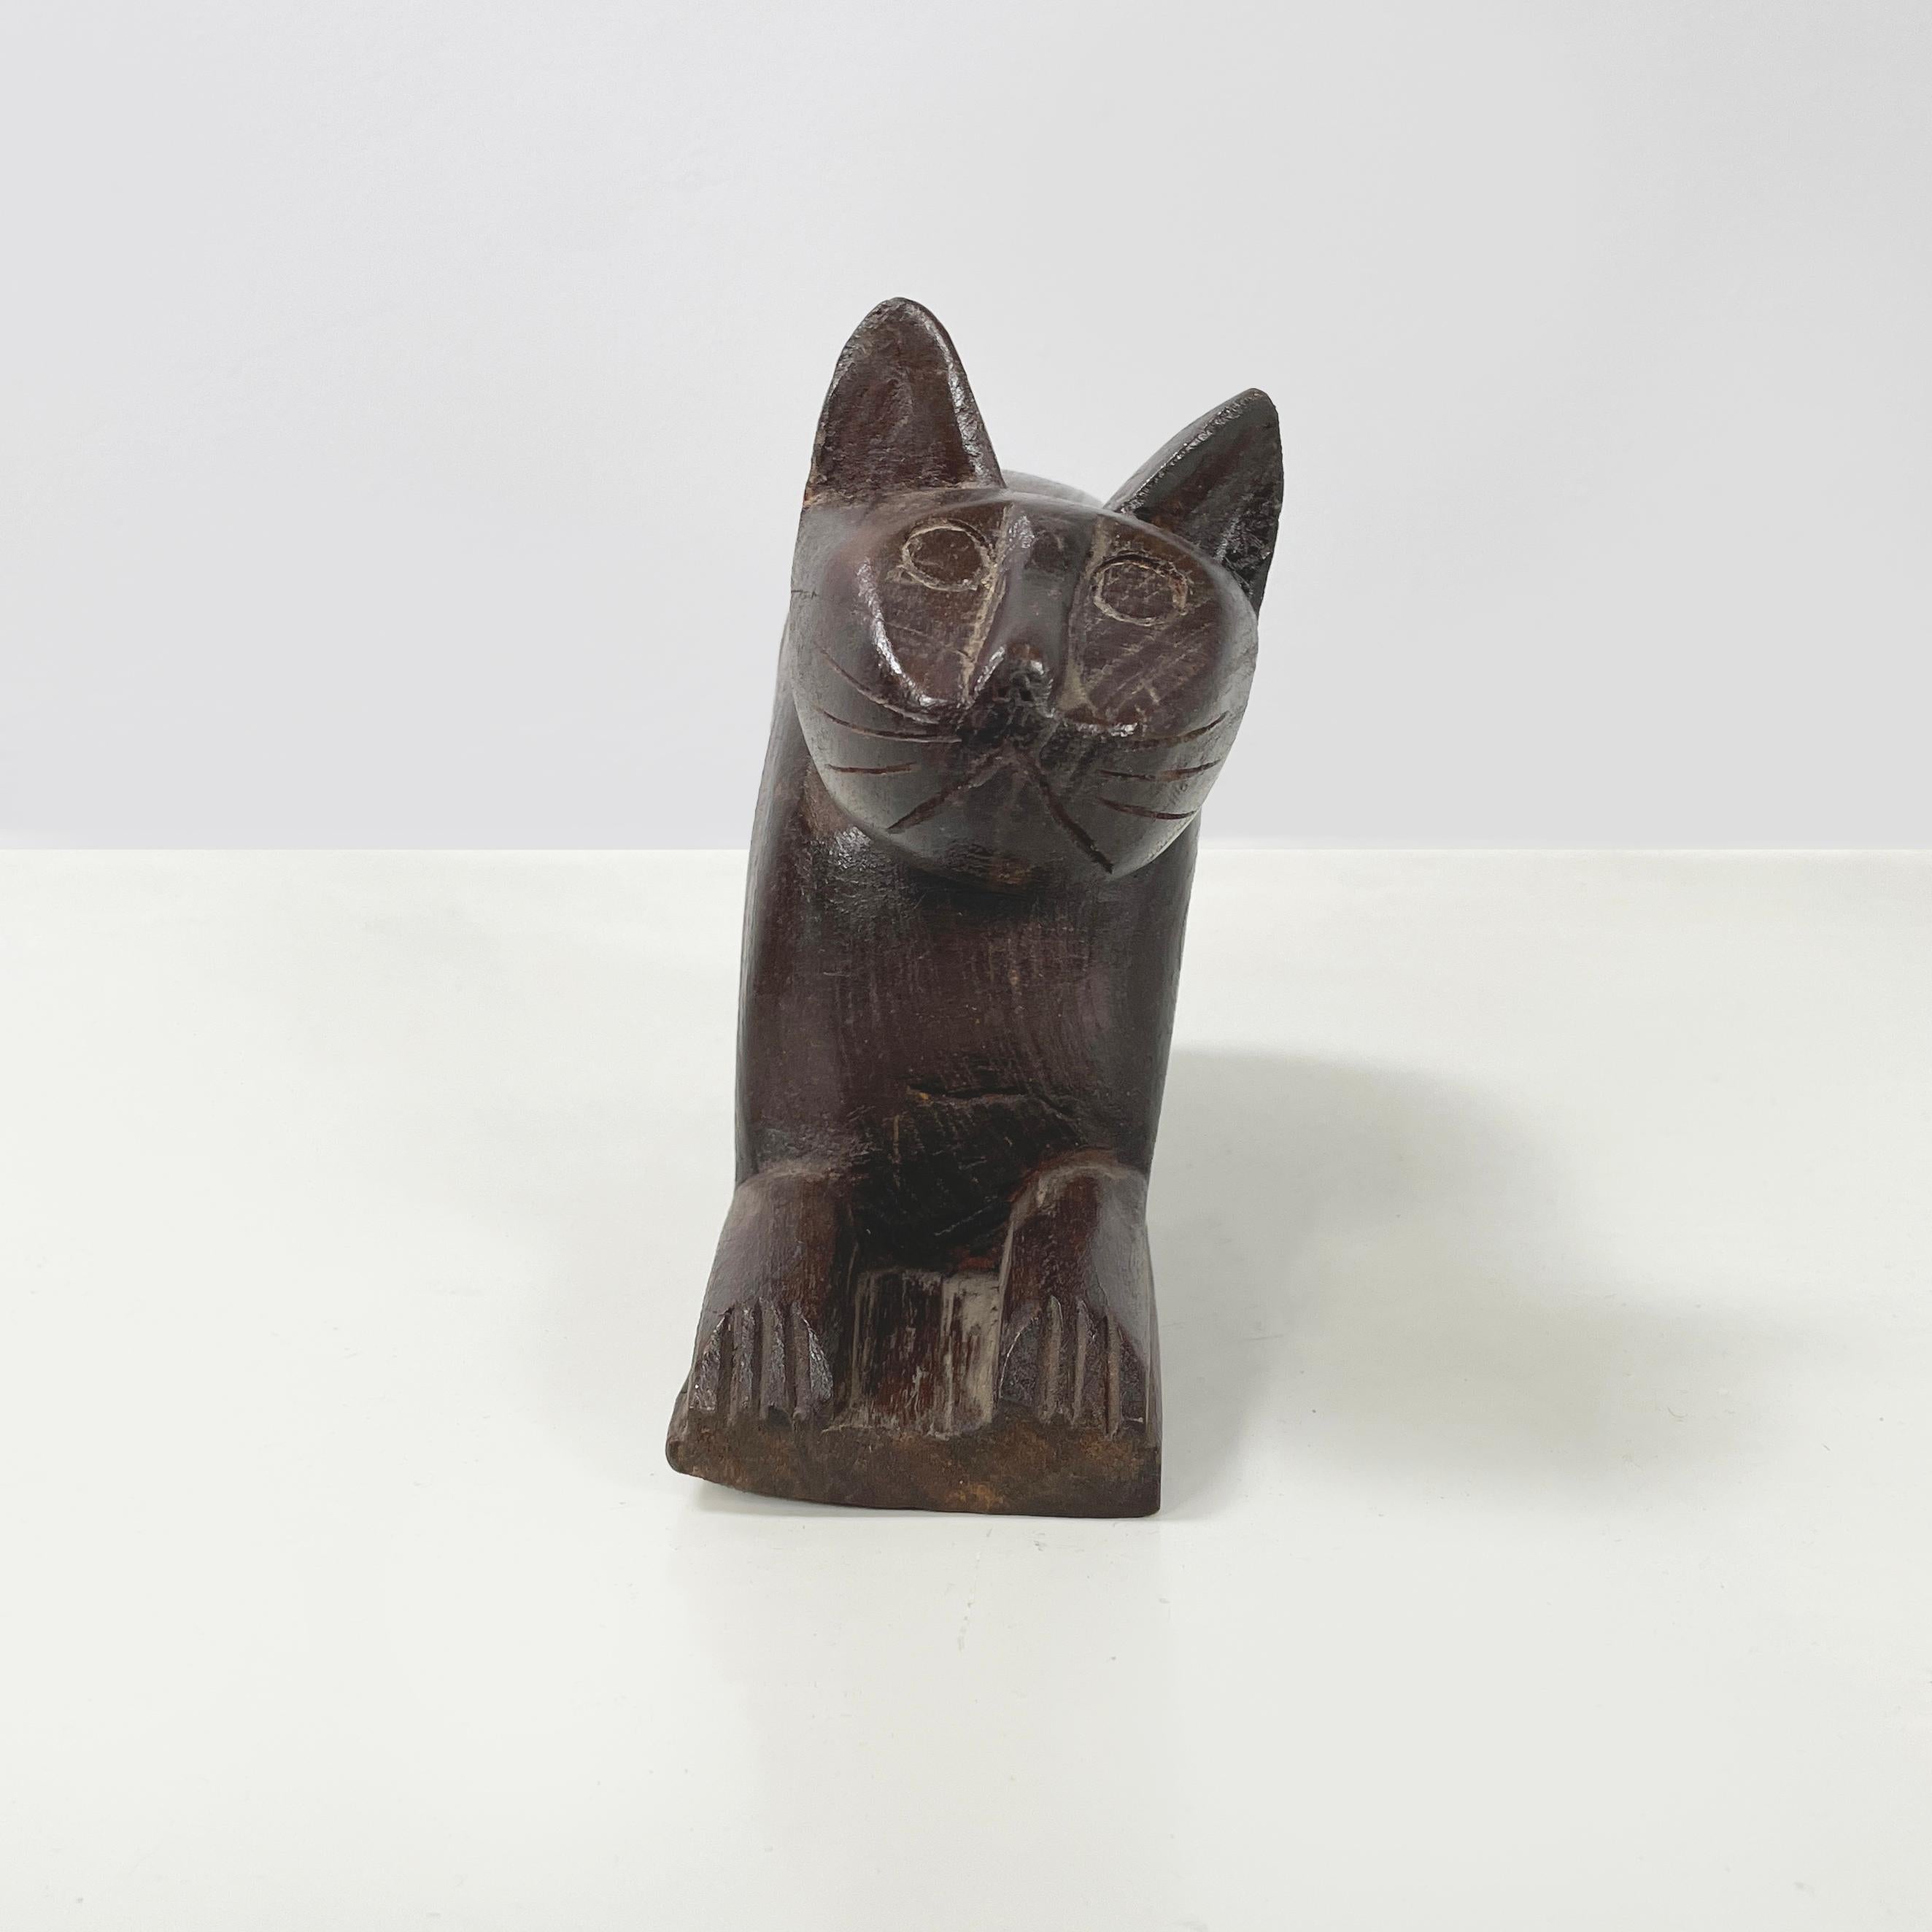 Chinese antique Wooden cat jewelry box or object holder, 1920s
Jewelry box with retractable compartment in the shape of a lying cat, entirely made of wood. The cat's features are stylized. The sliding compartment is on the cat's belly. When closed,